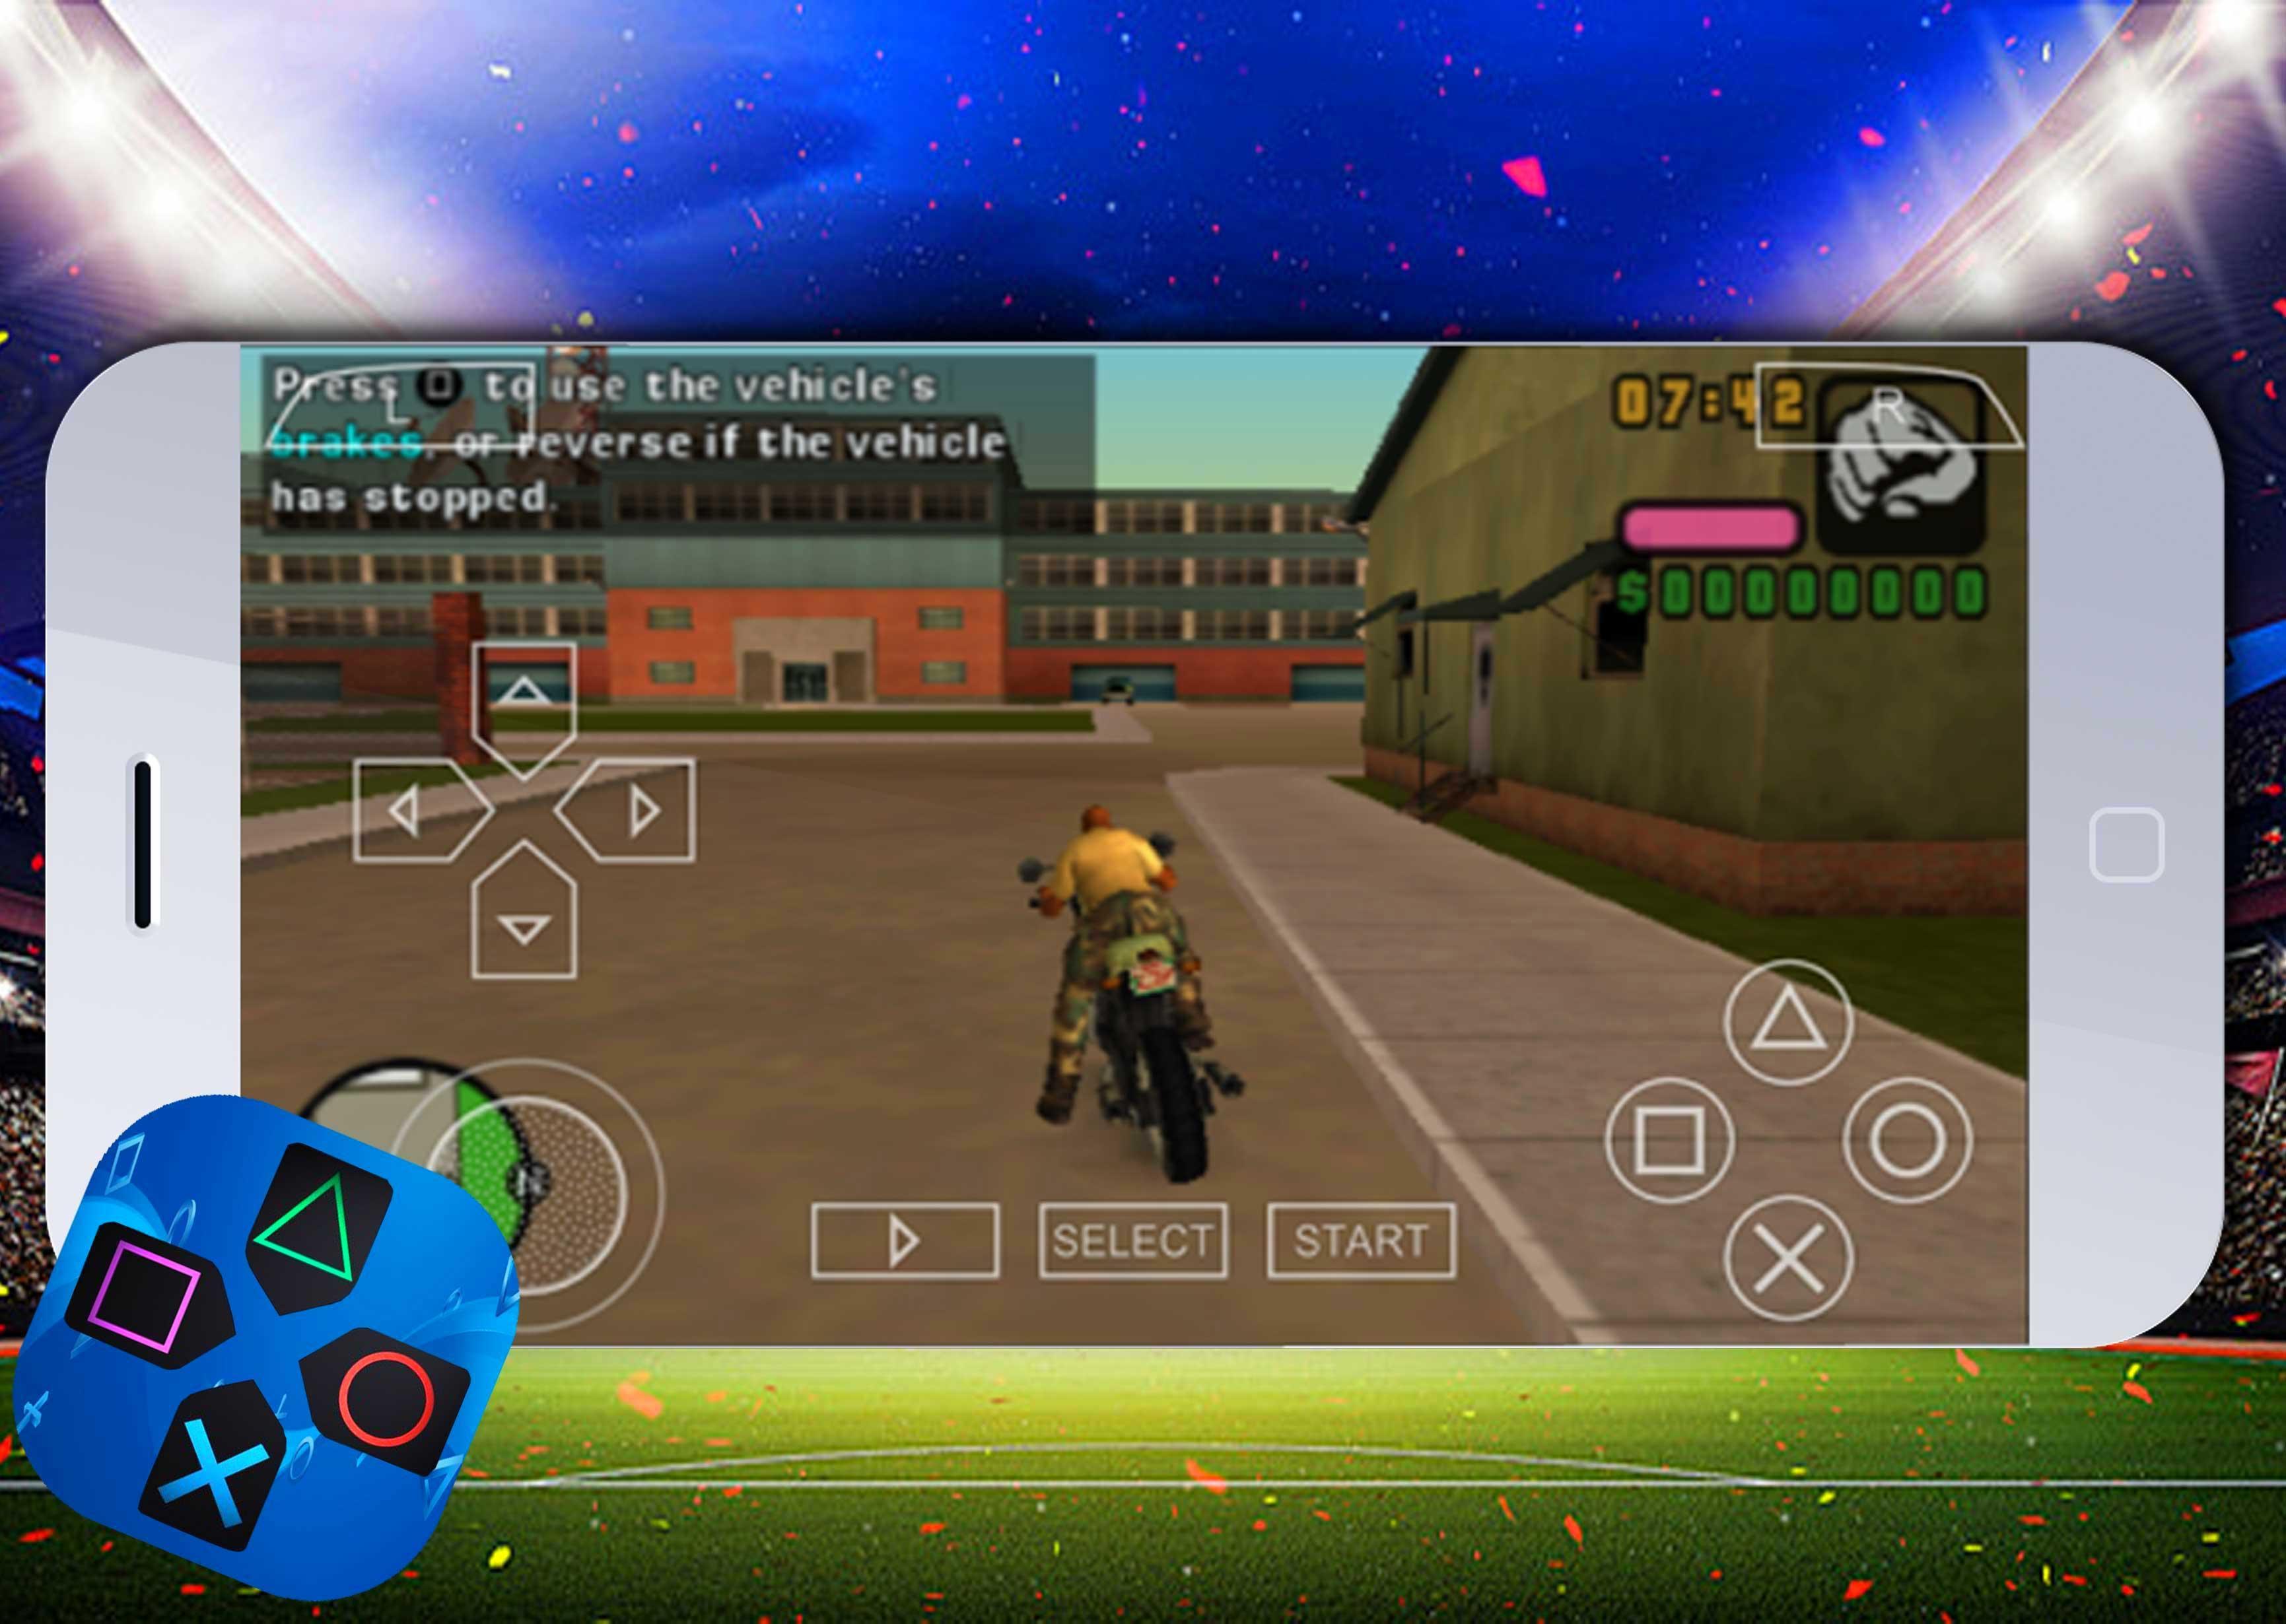 PPSSPP - New psp Emulator Pro 2018 for Android - APK Download